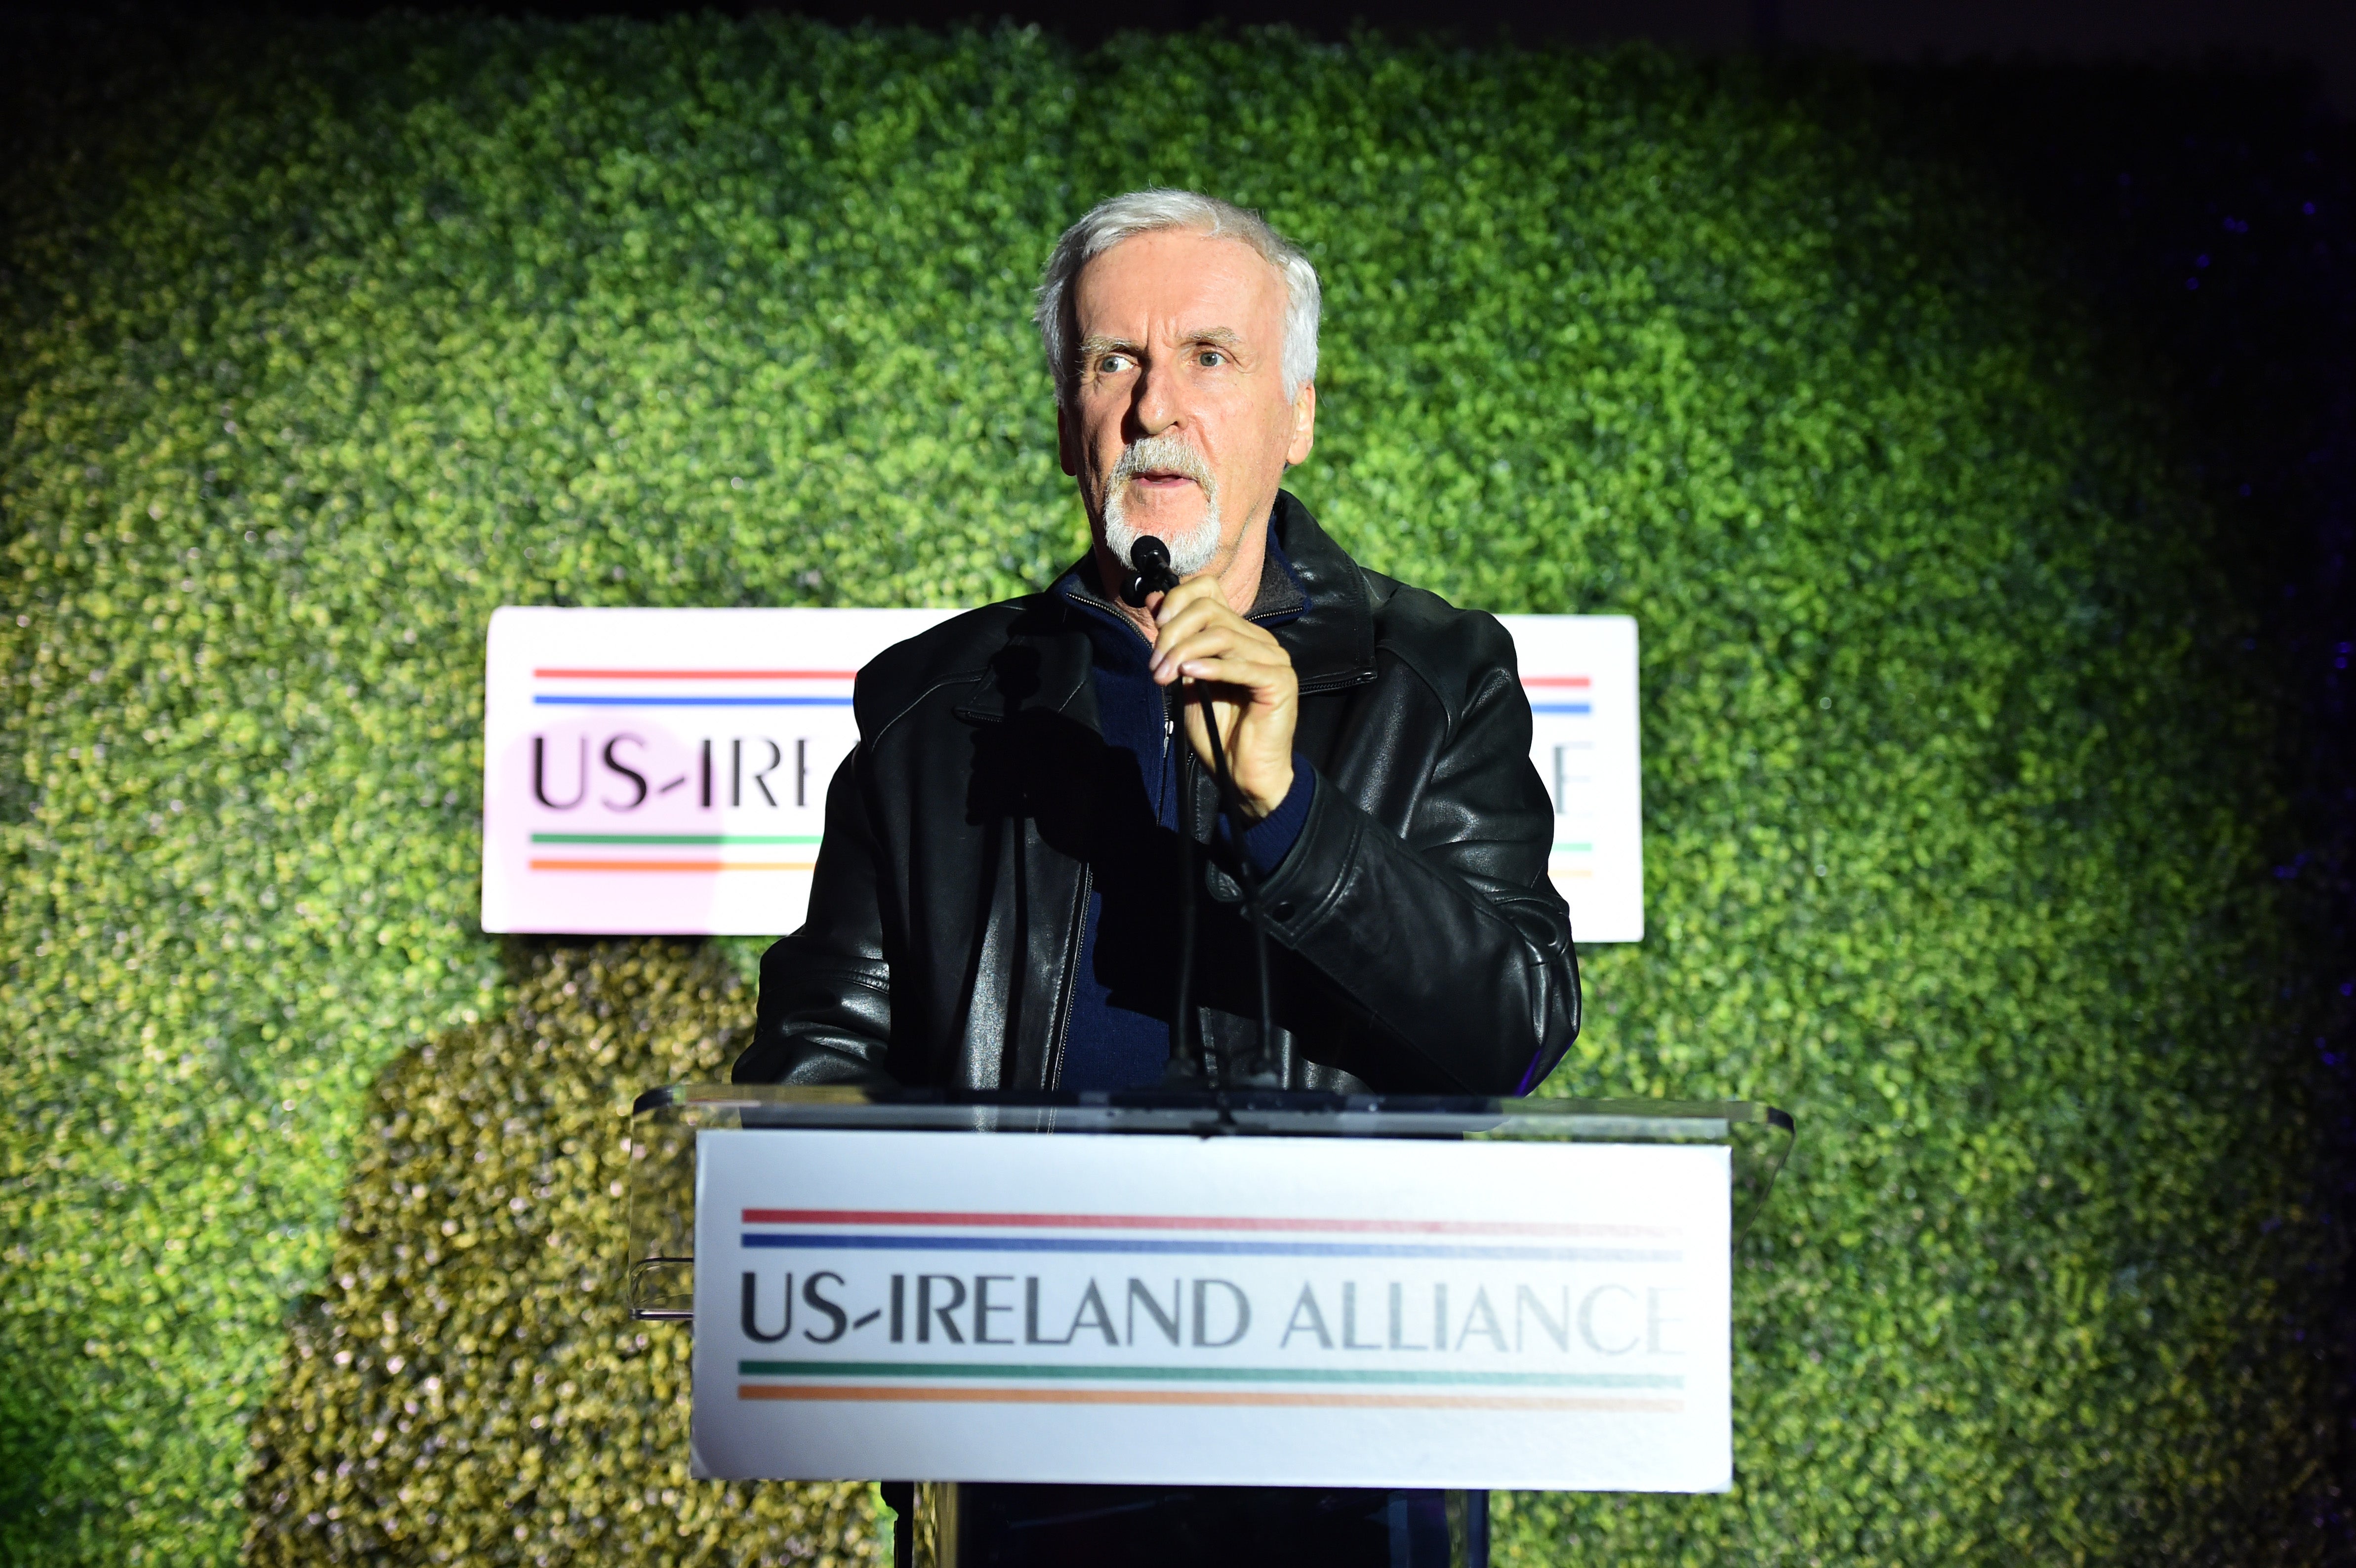 Director James Cameron, while introducing Avatar VFX expert Richie Baneham, mentioned the Dubliner’s three boys and family – a sense of community imbued the Irish awards, with the indigenous and expat industry celebrating one year after record nominations